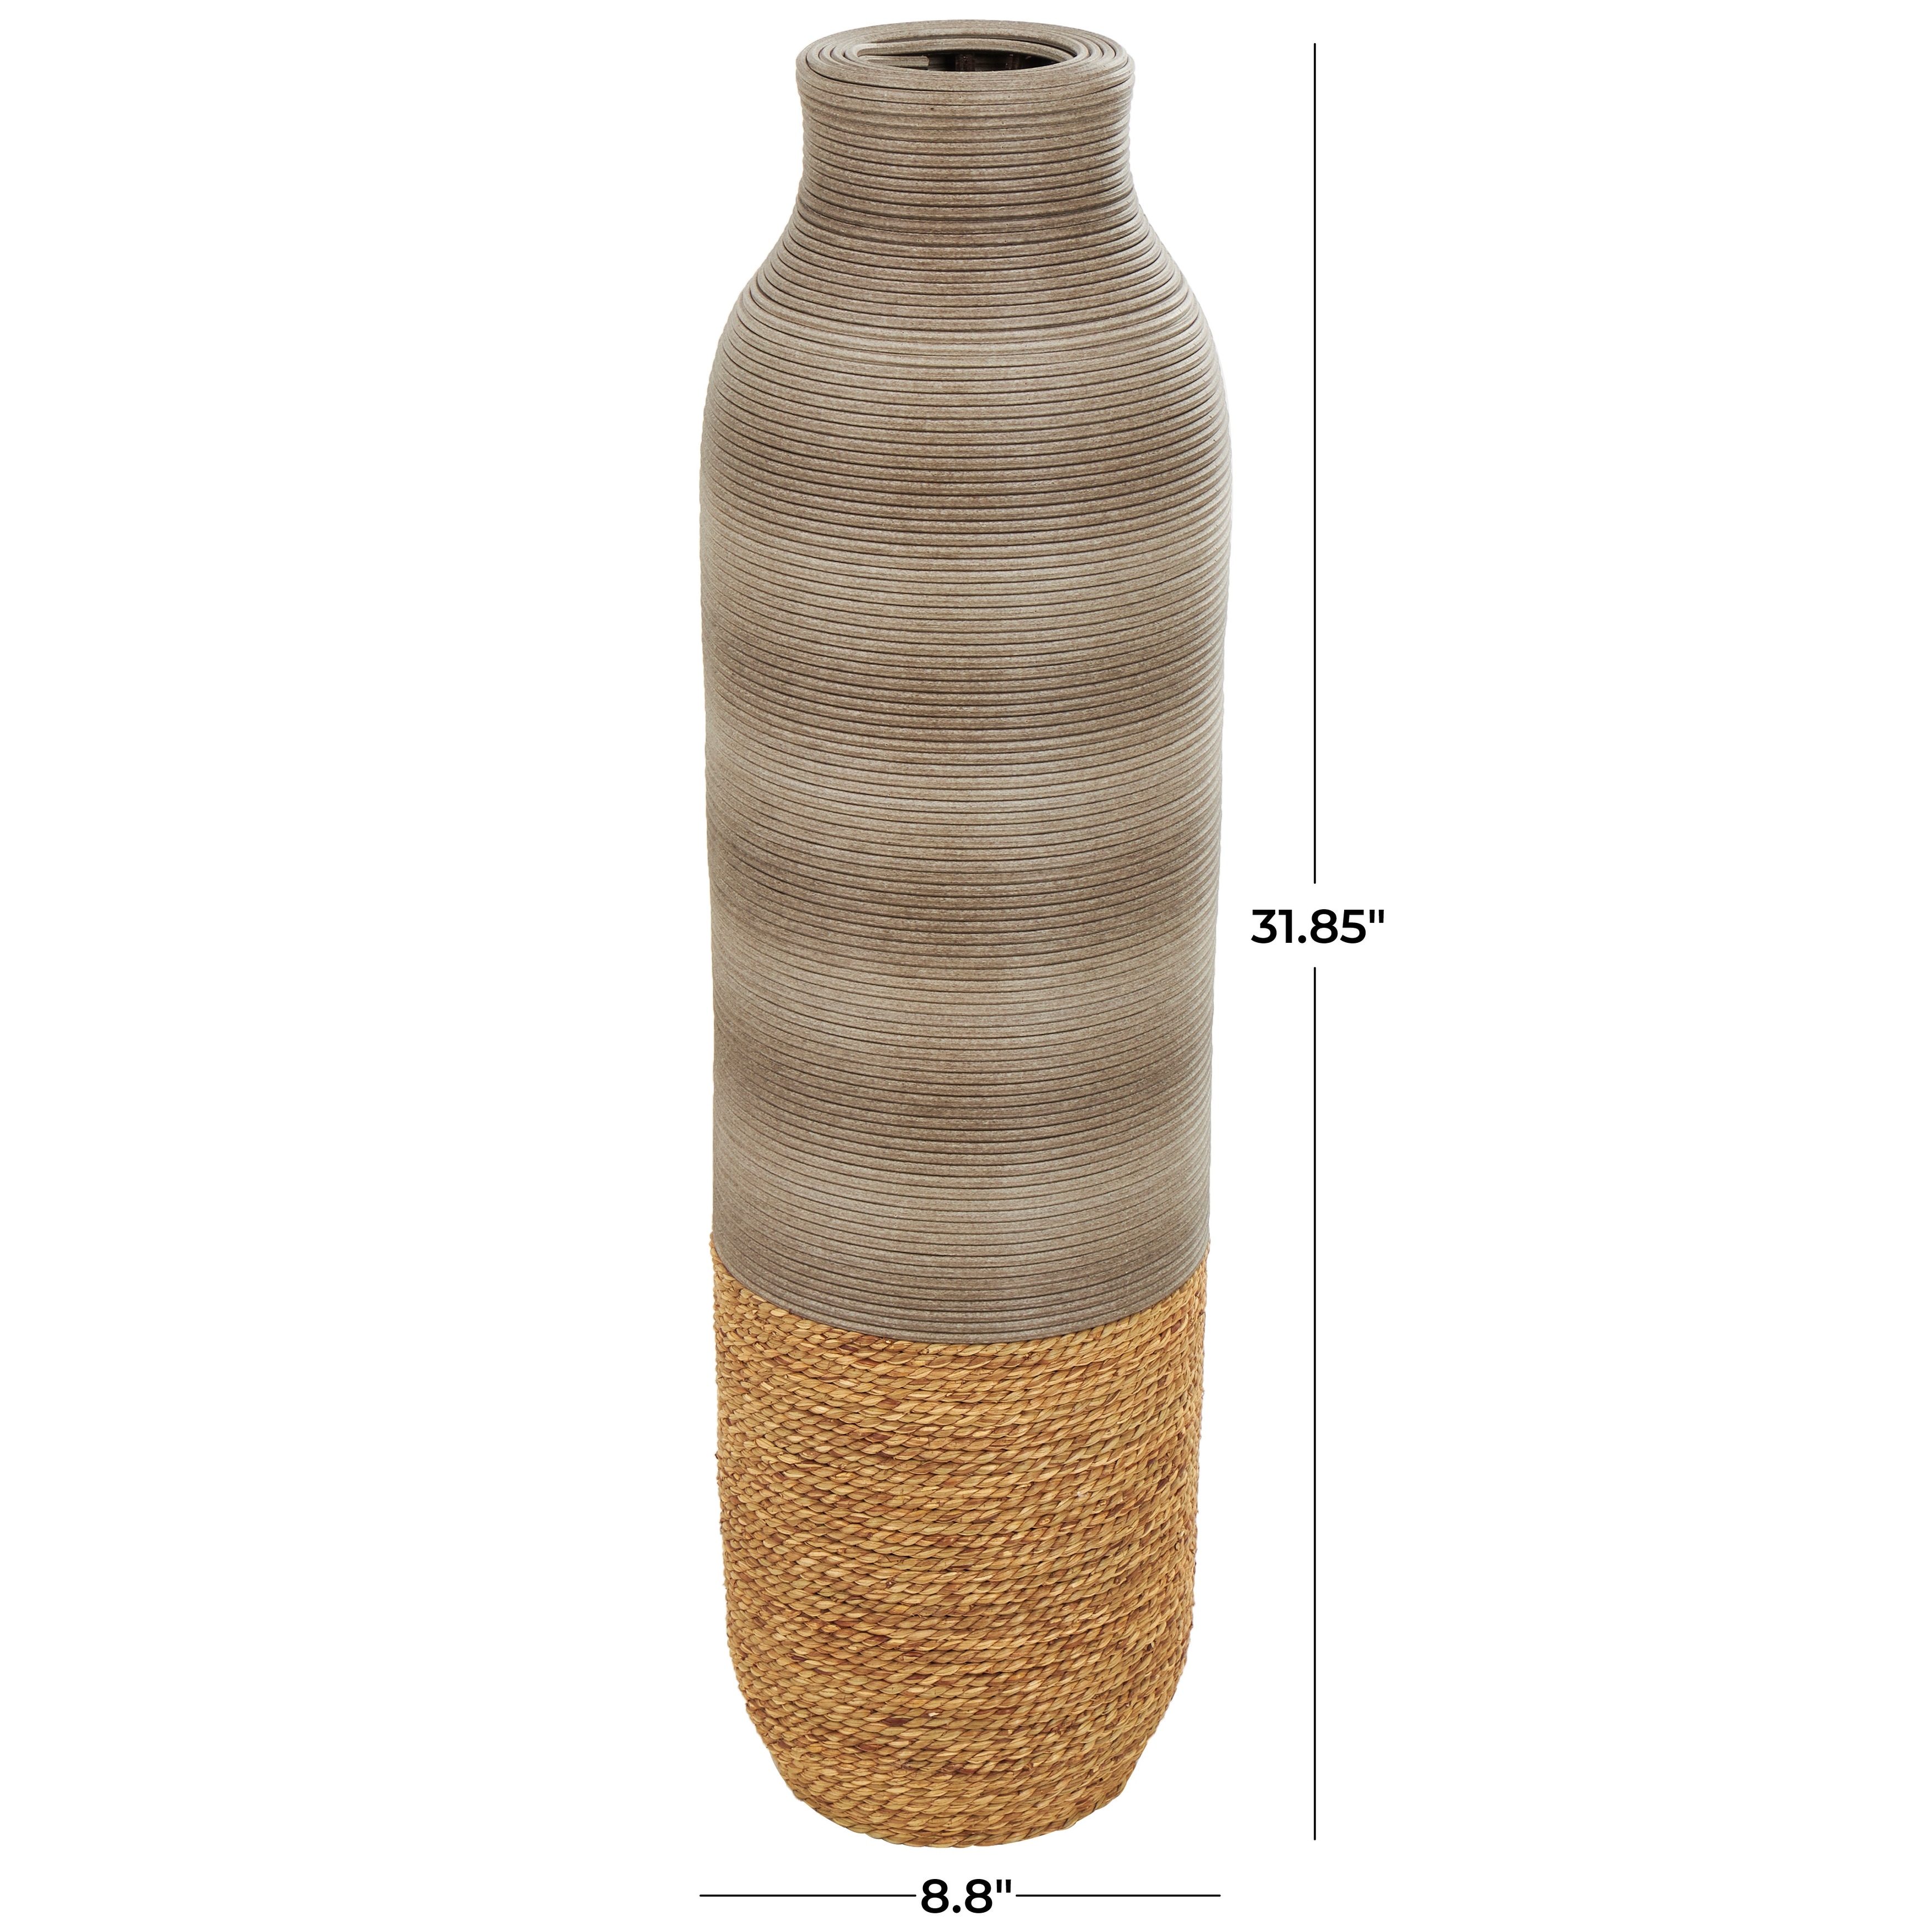 Brown Seagrass Handmade Ribbed Vase with Coiled Seagrass Base